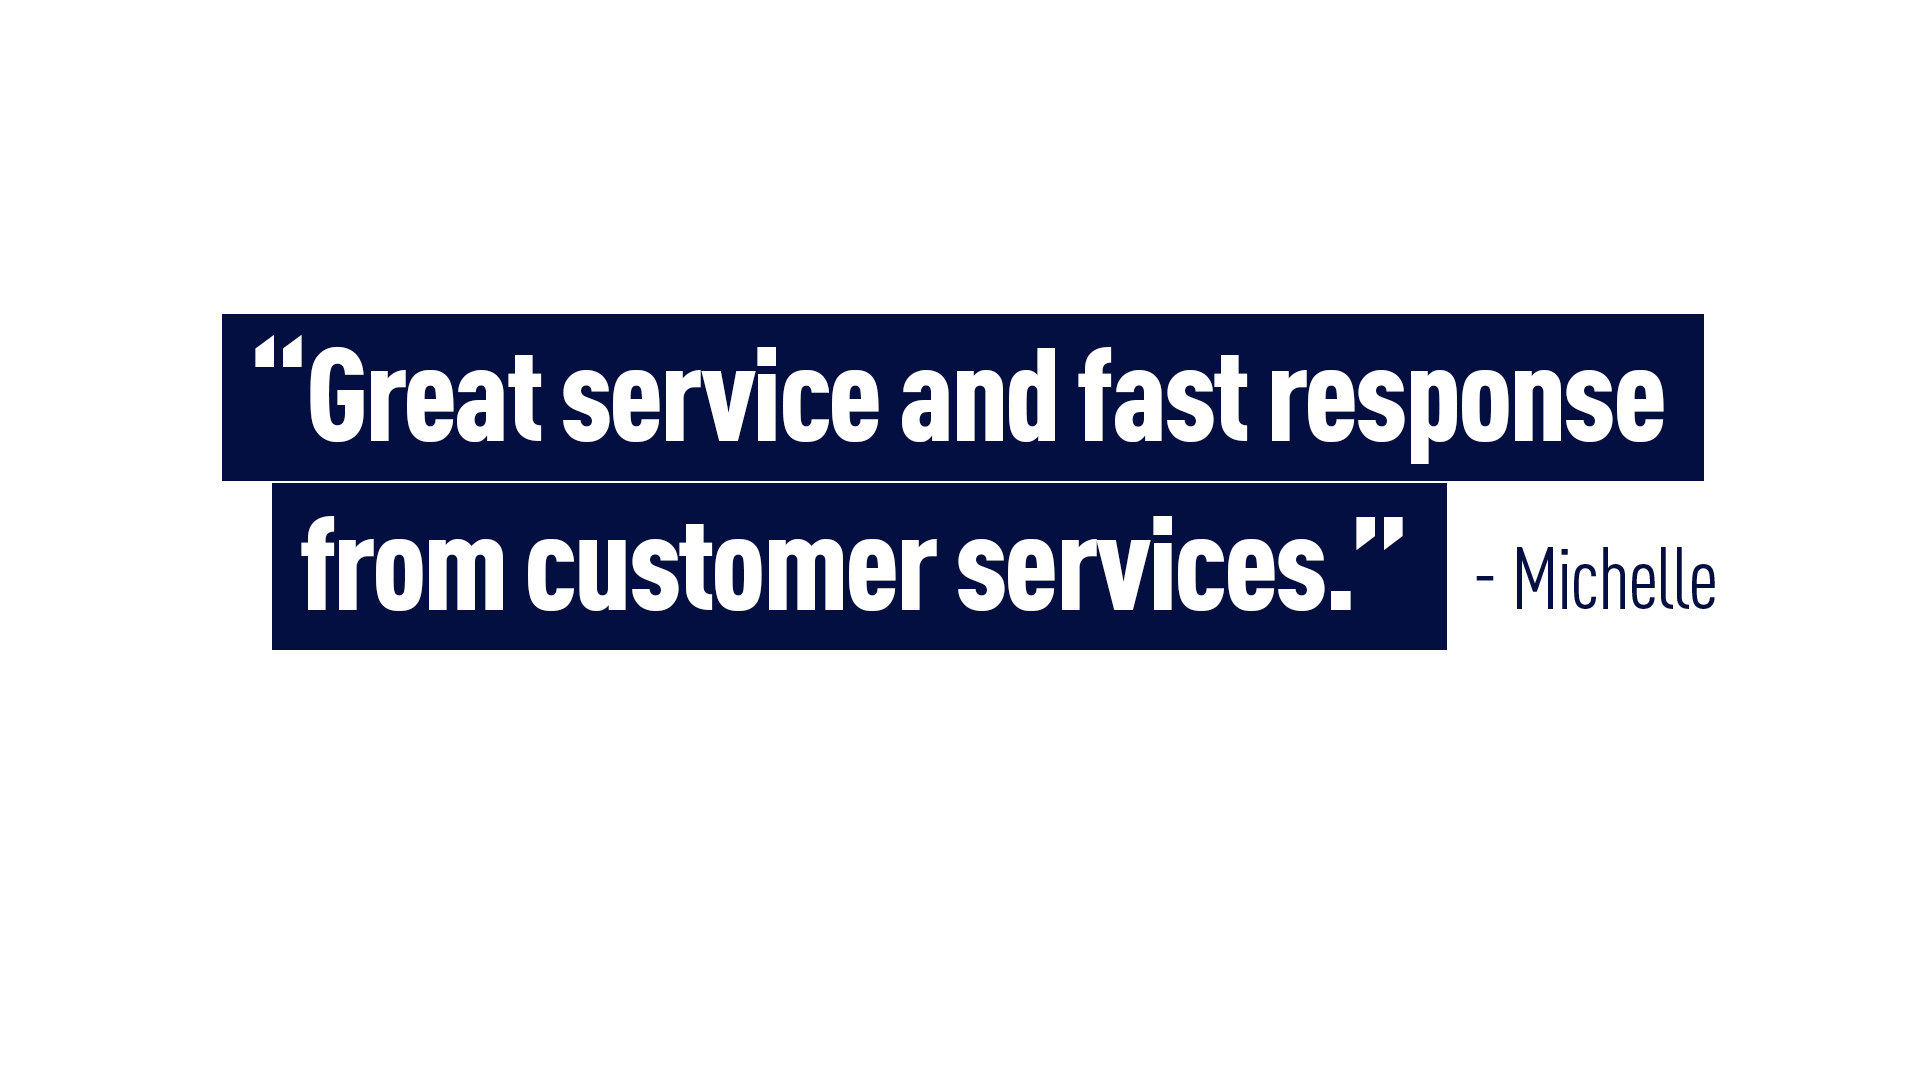 “Great service and fast response from customer services” Michelle